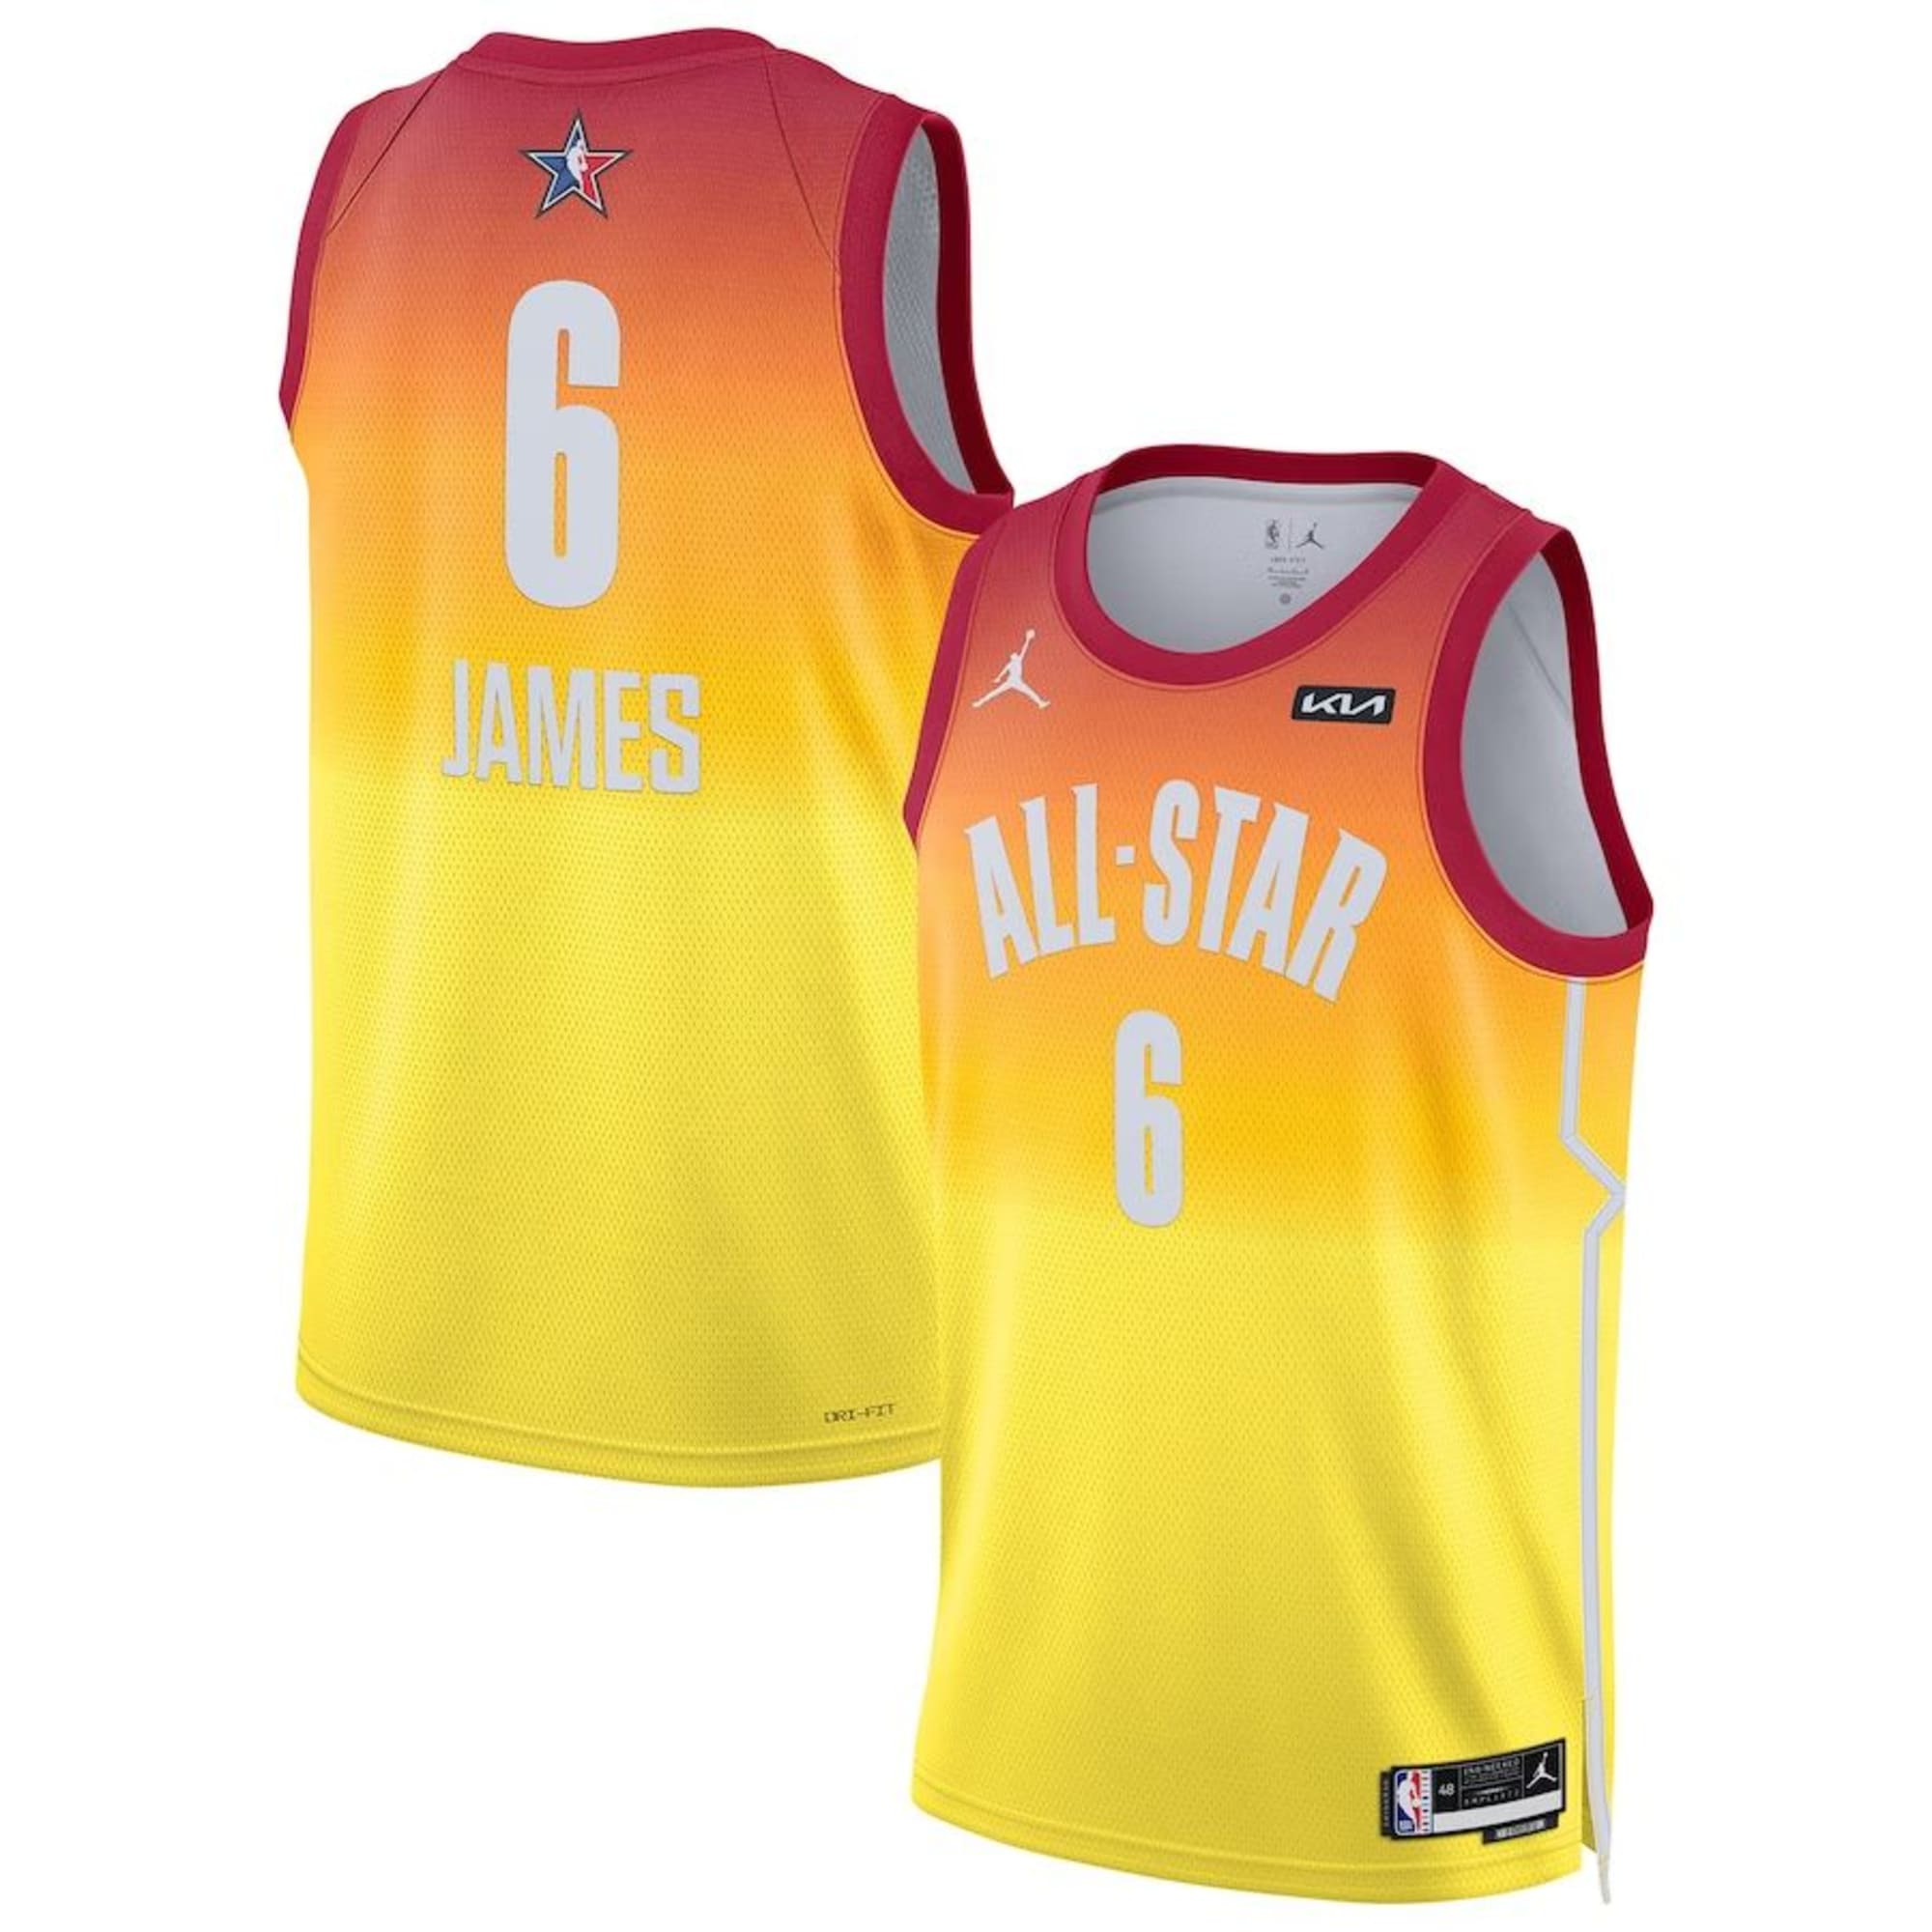 Order your 2023 LeBron James All-Star merchandise today